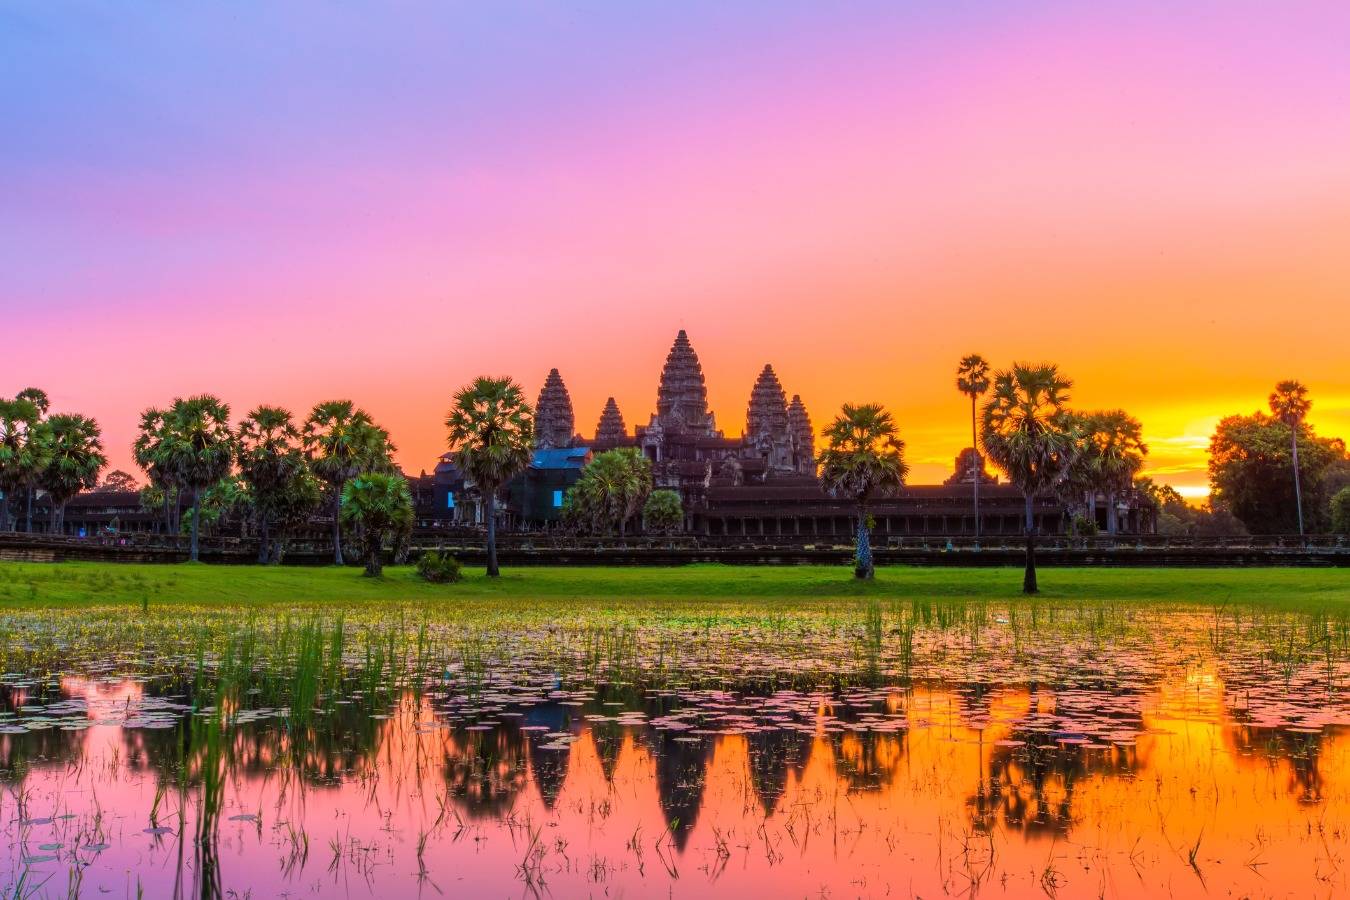 Cambodia has now reopened for Indians